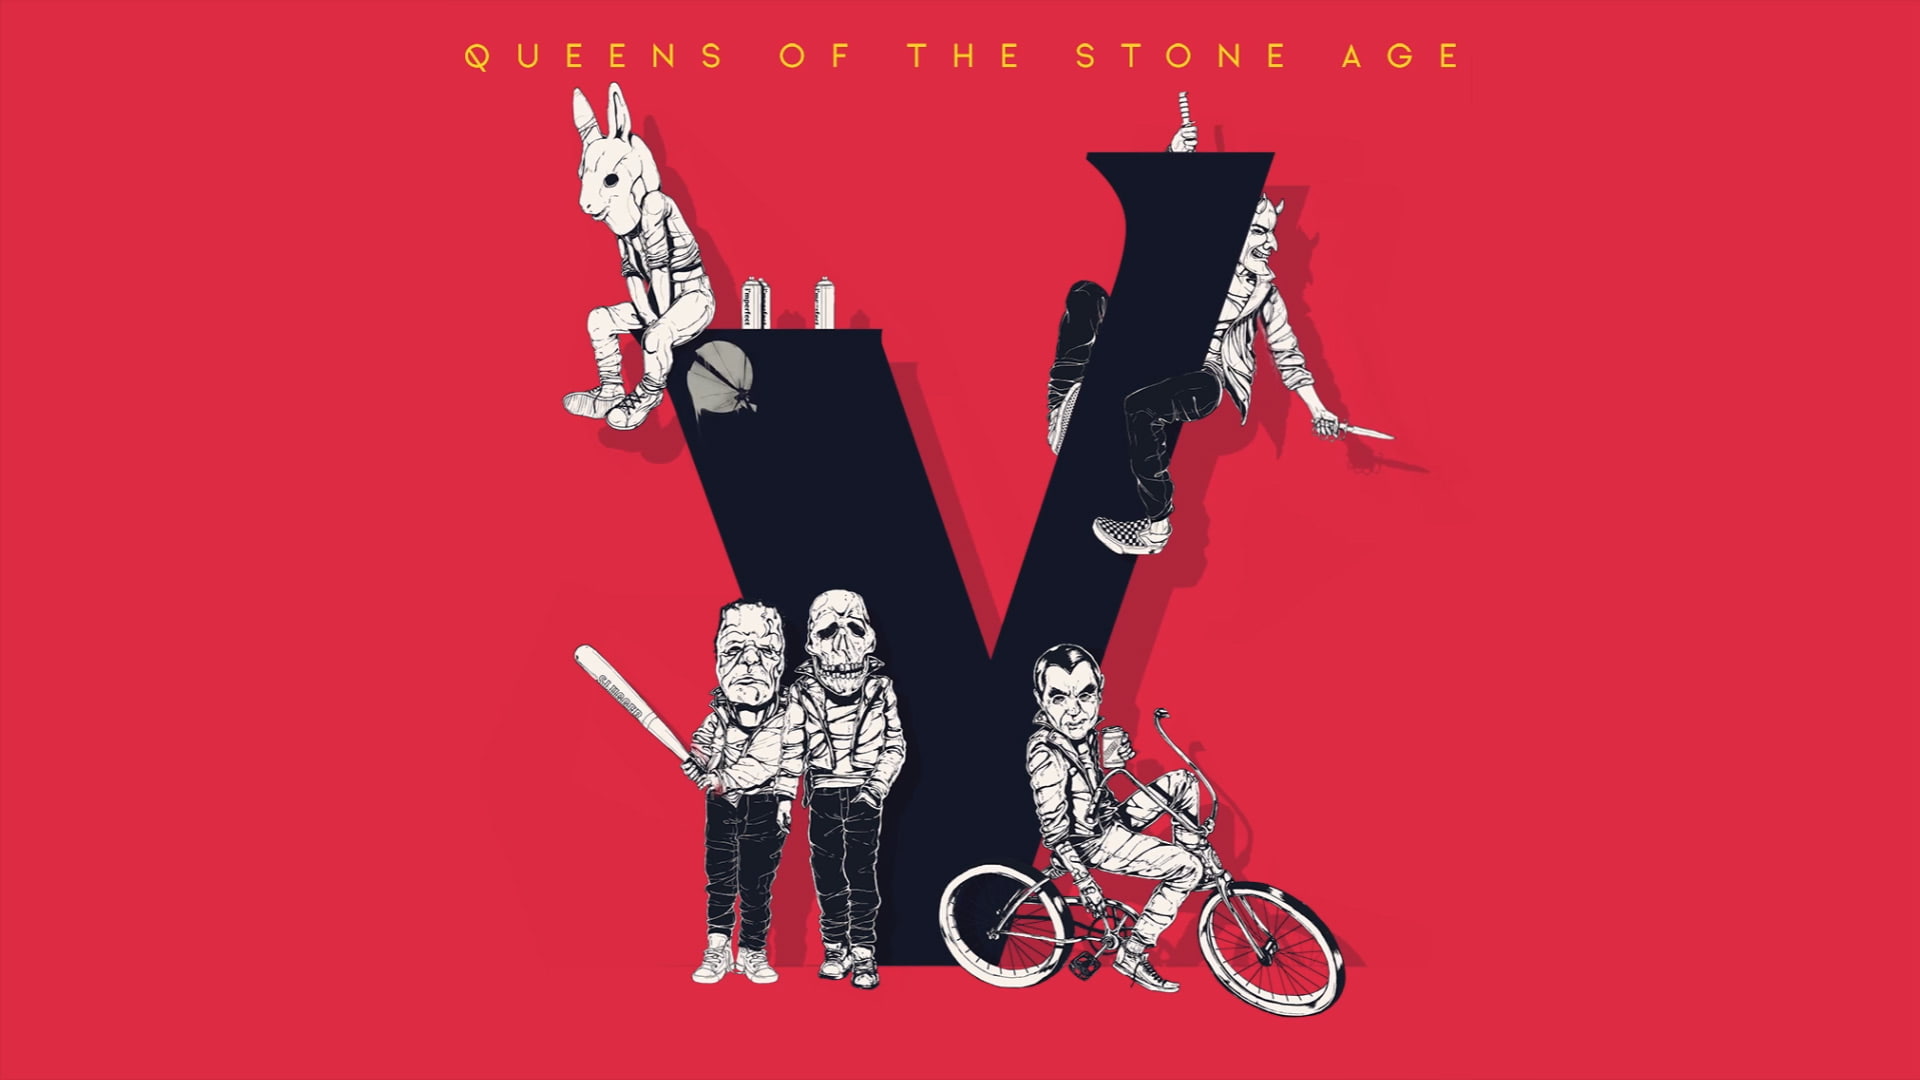 Queens of the Stone Age, villains, studio shot, colored background